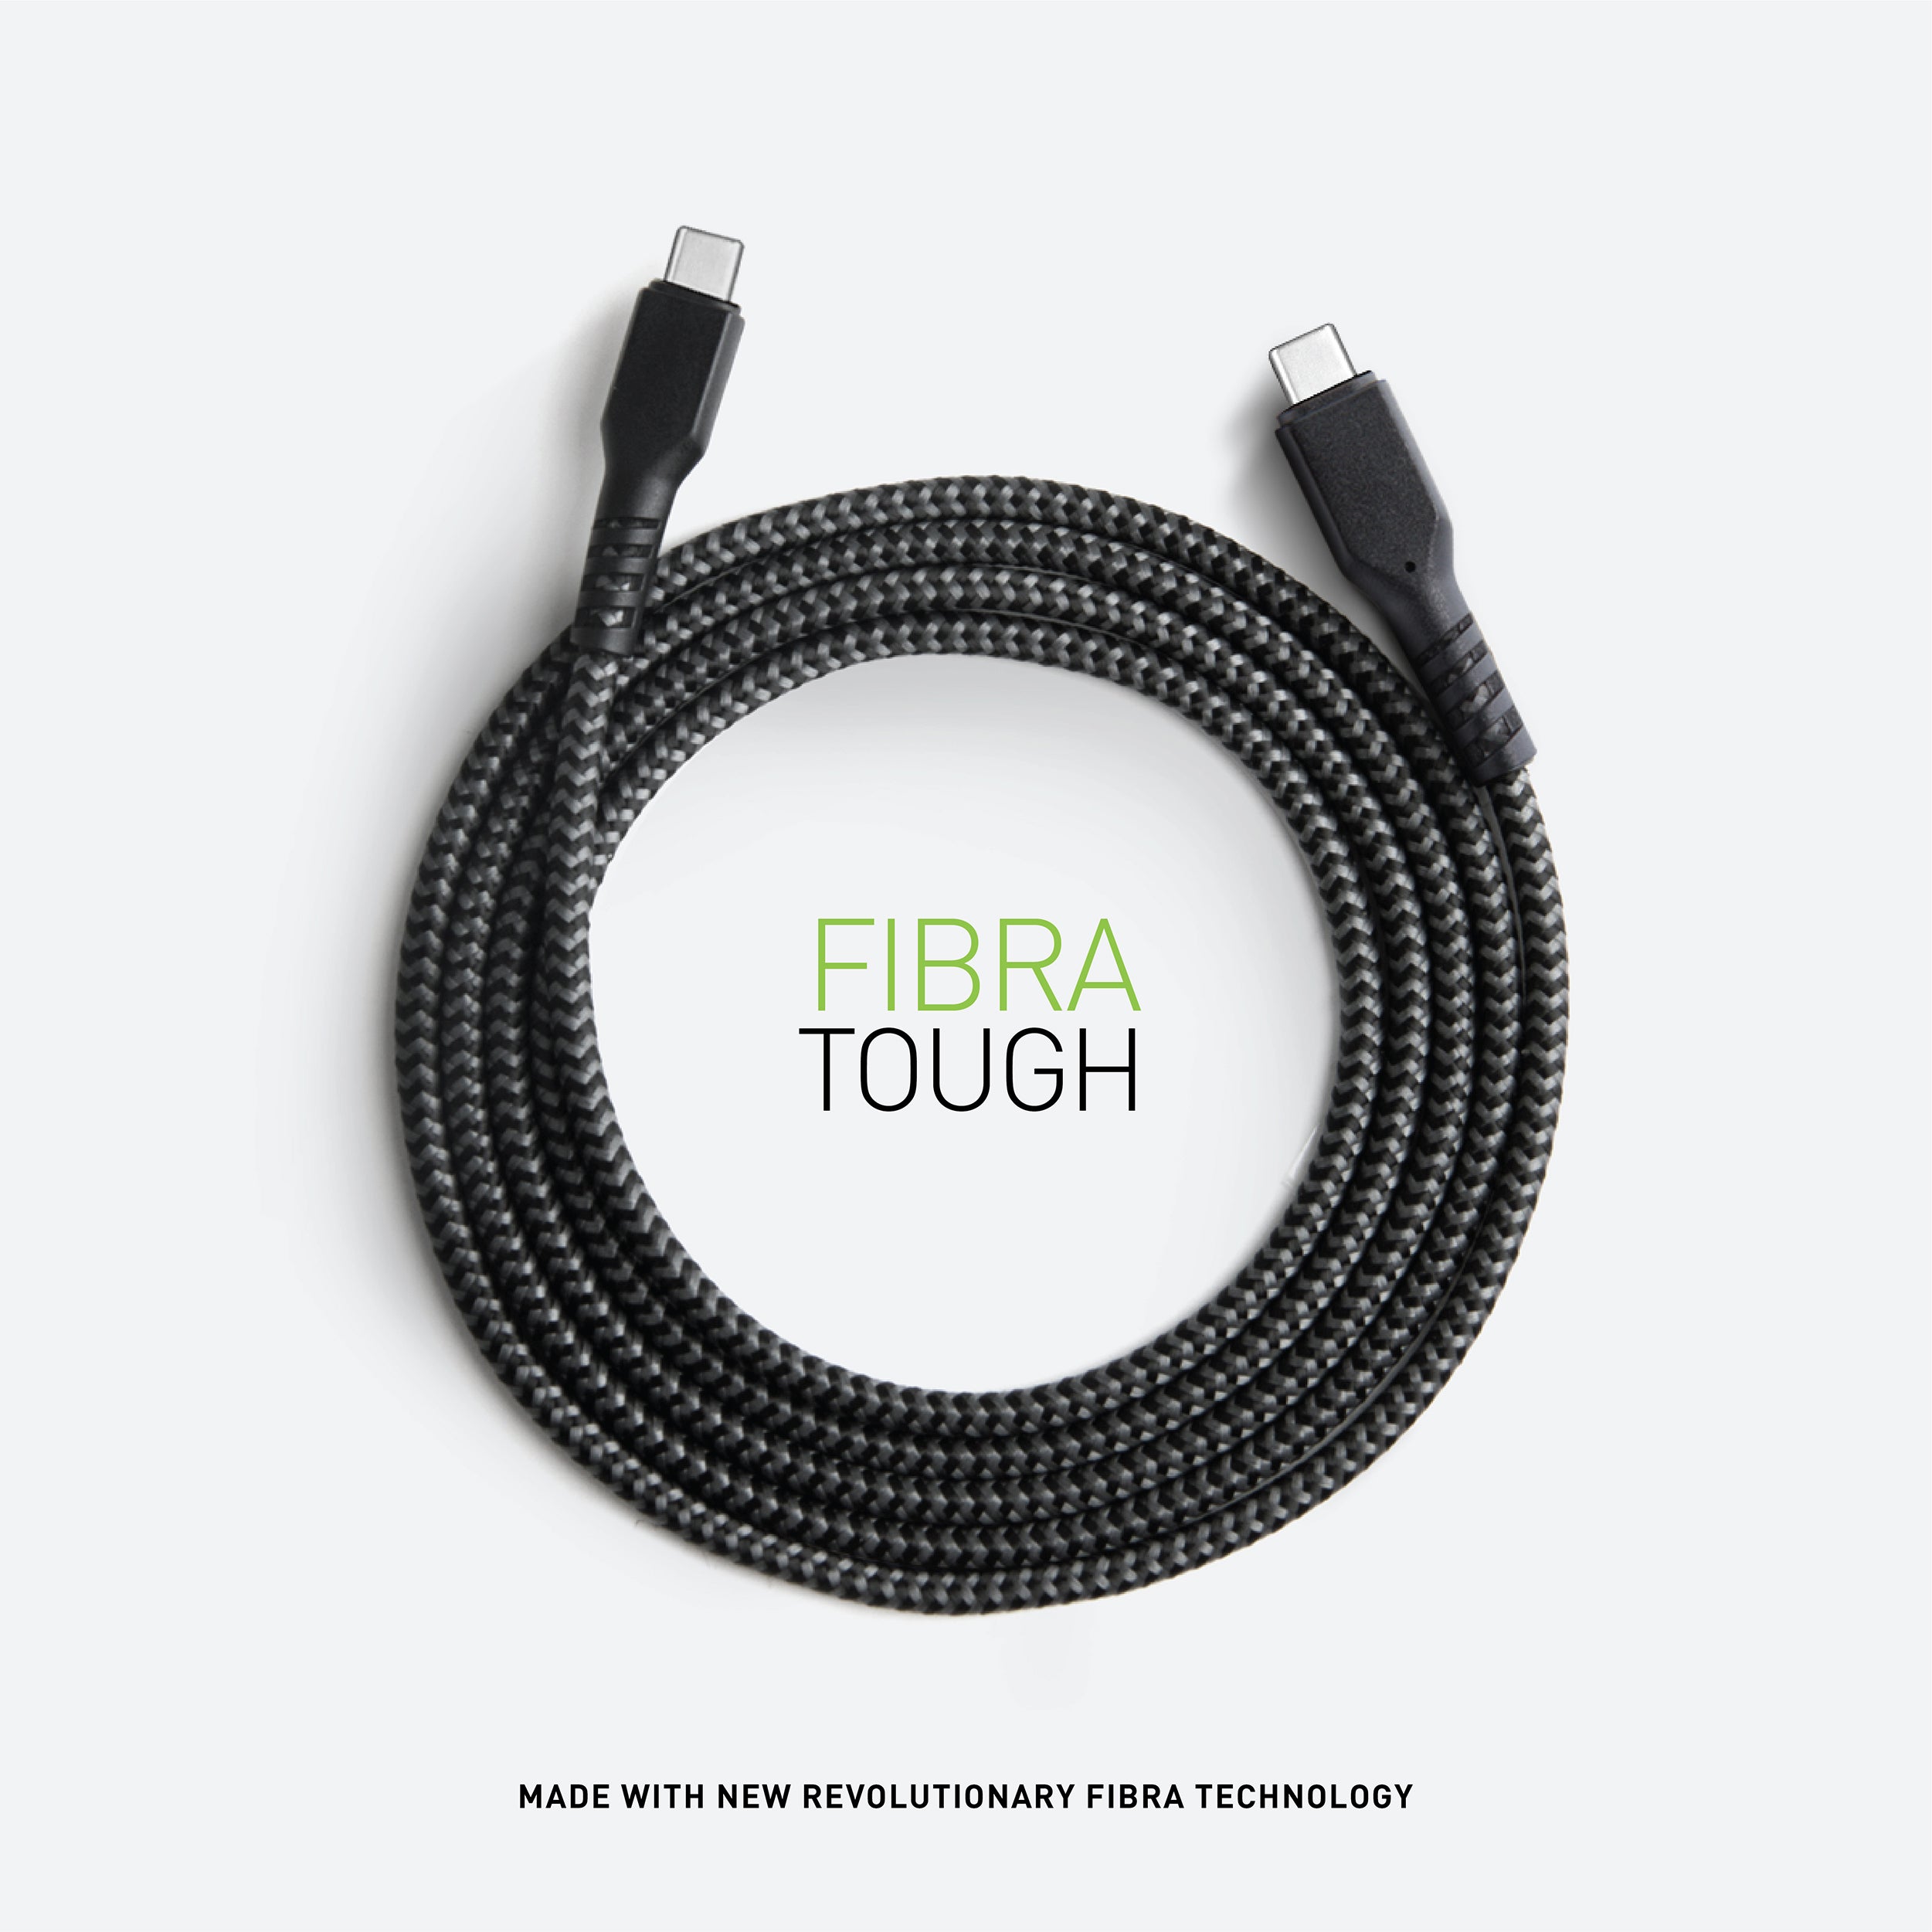 Fibra Tough USB-C to Lightning cable: A durable charging cable designed to connect USB-C devices to Lightning devices.